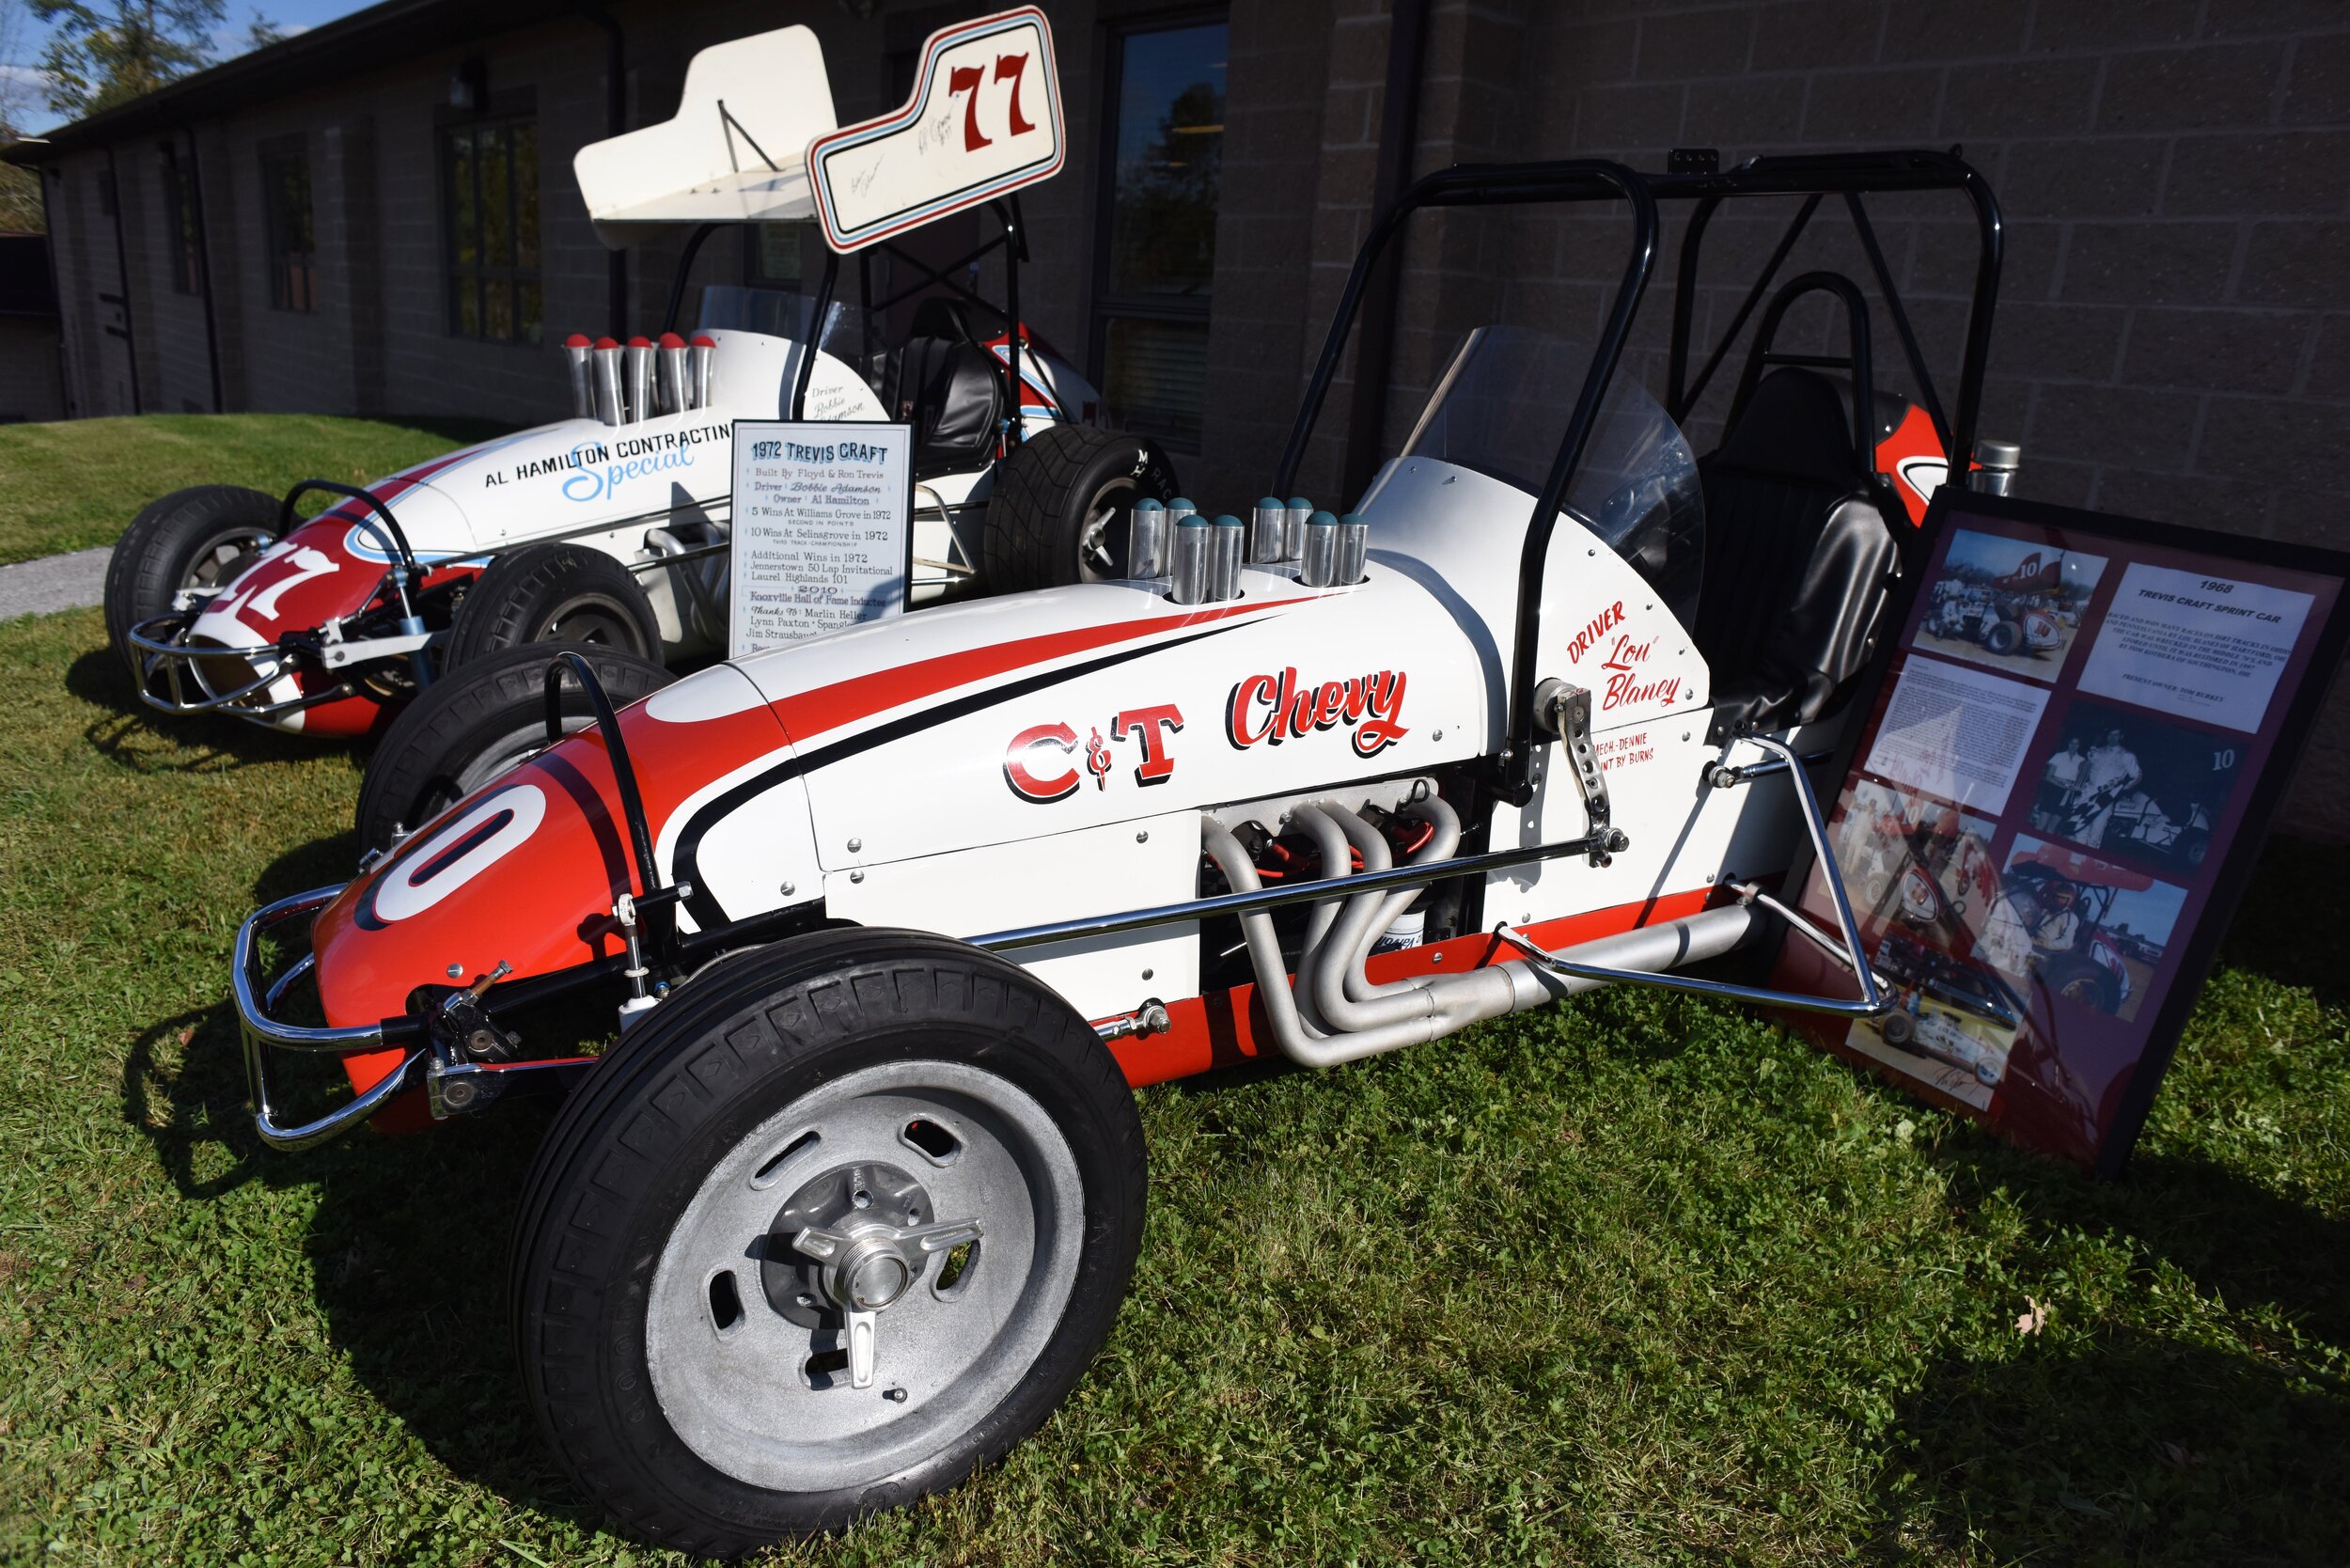  The transition from non-wing to wing took place at the end of the sixties and early ‘70s. Two Trevis Craft sprinters on display for the Trevis Race Car Reunion.  The museum hosts racing related events all year long. 